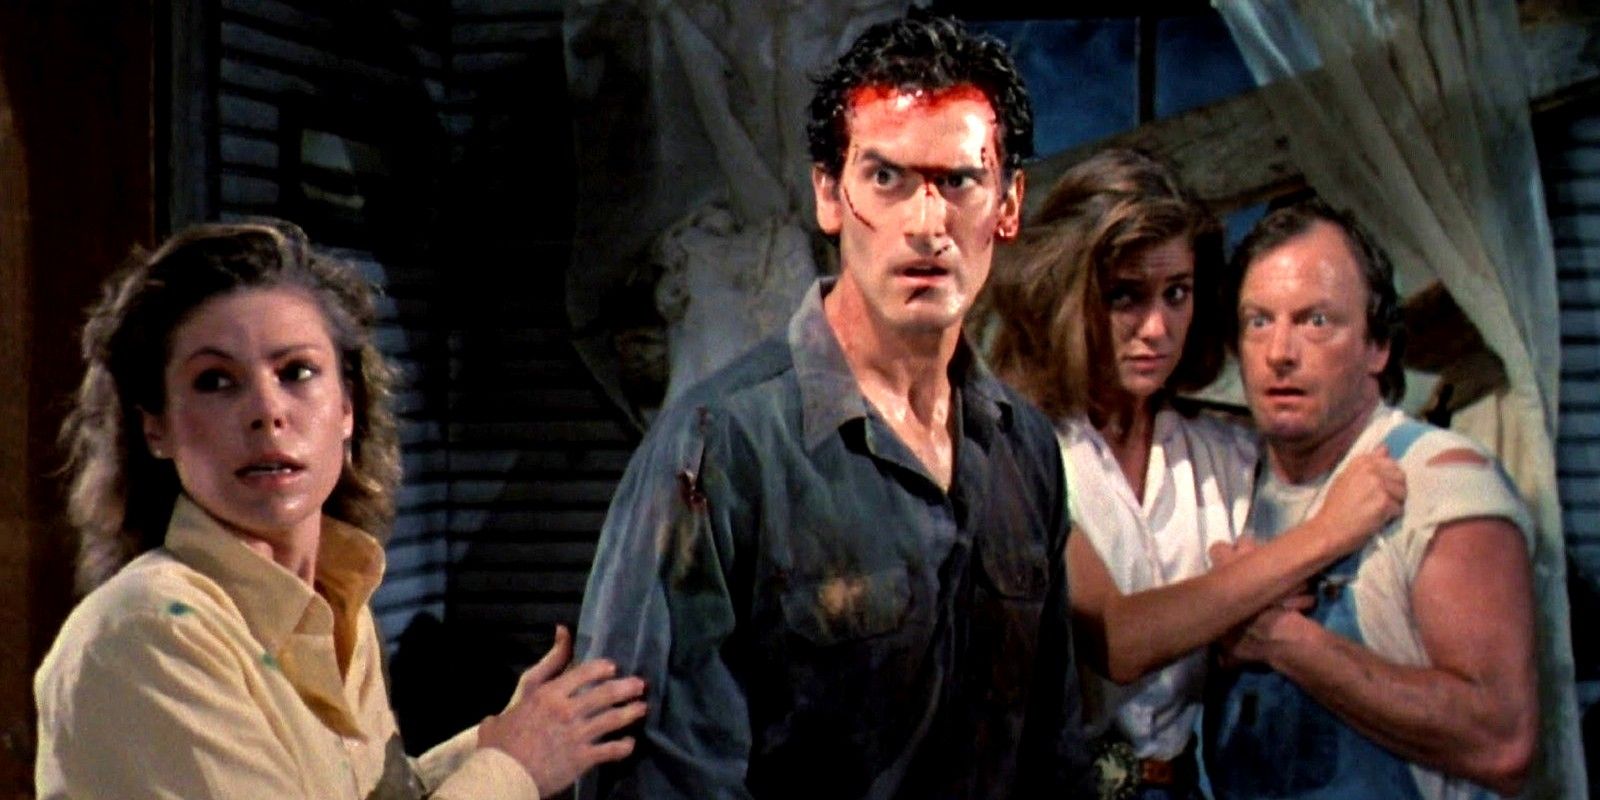 Bruce campbell as Ash Annie Jake and Bobby Joe in Evil Dead 2 1987